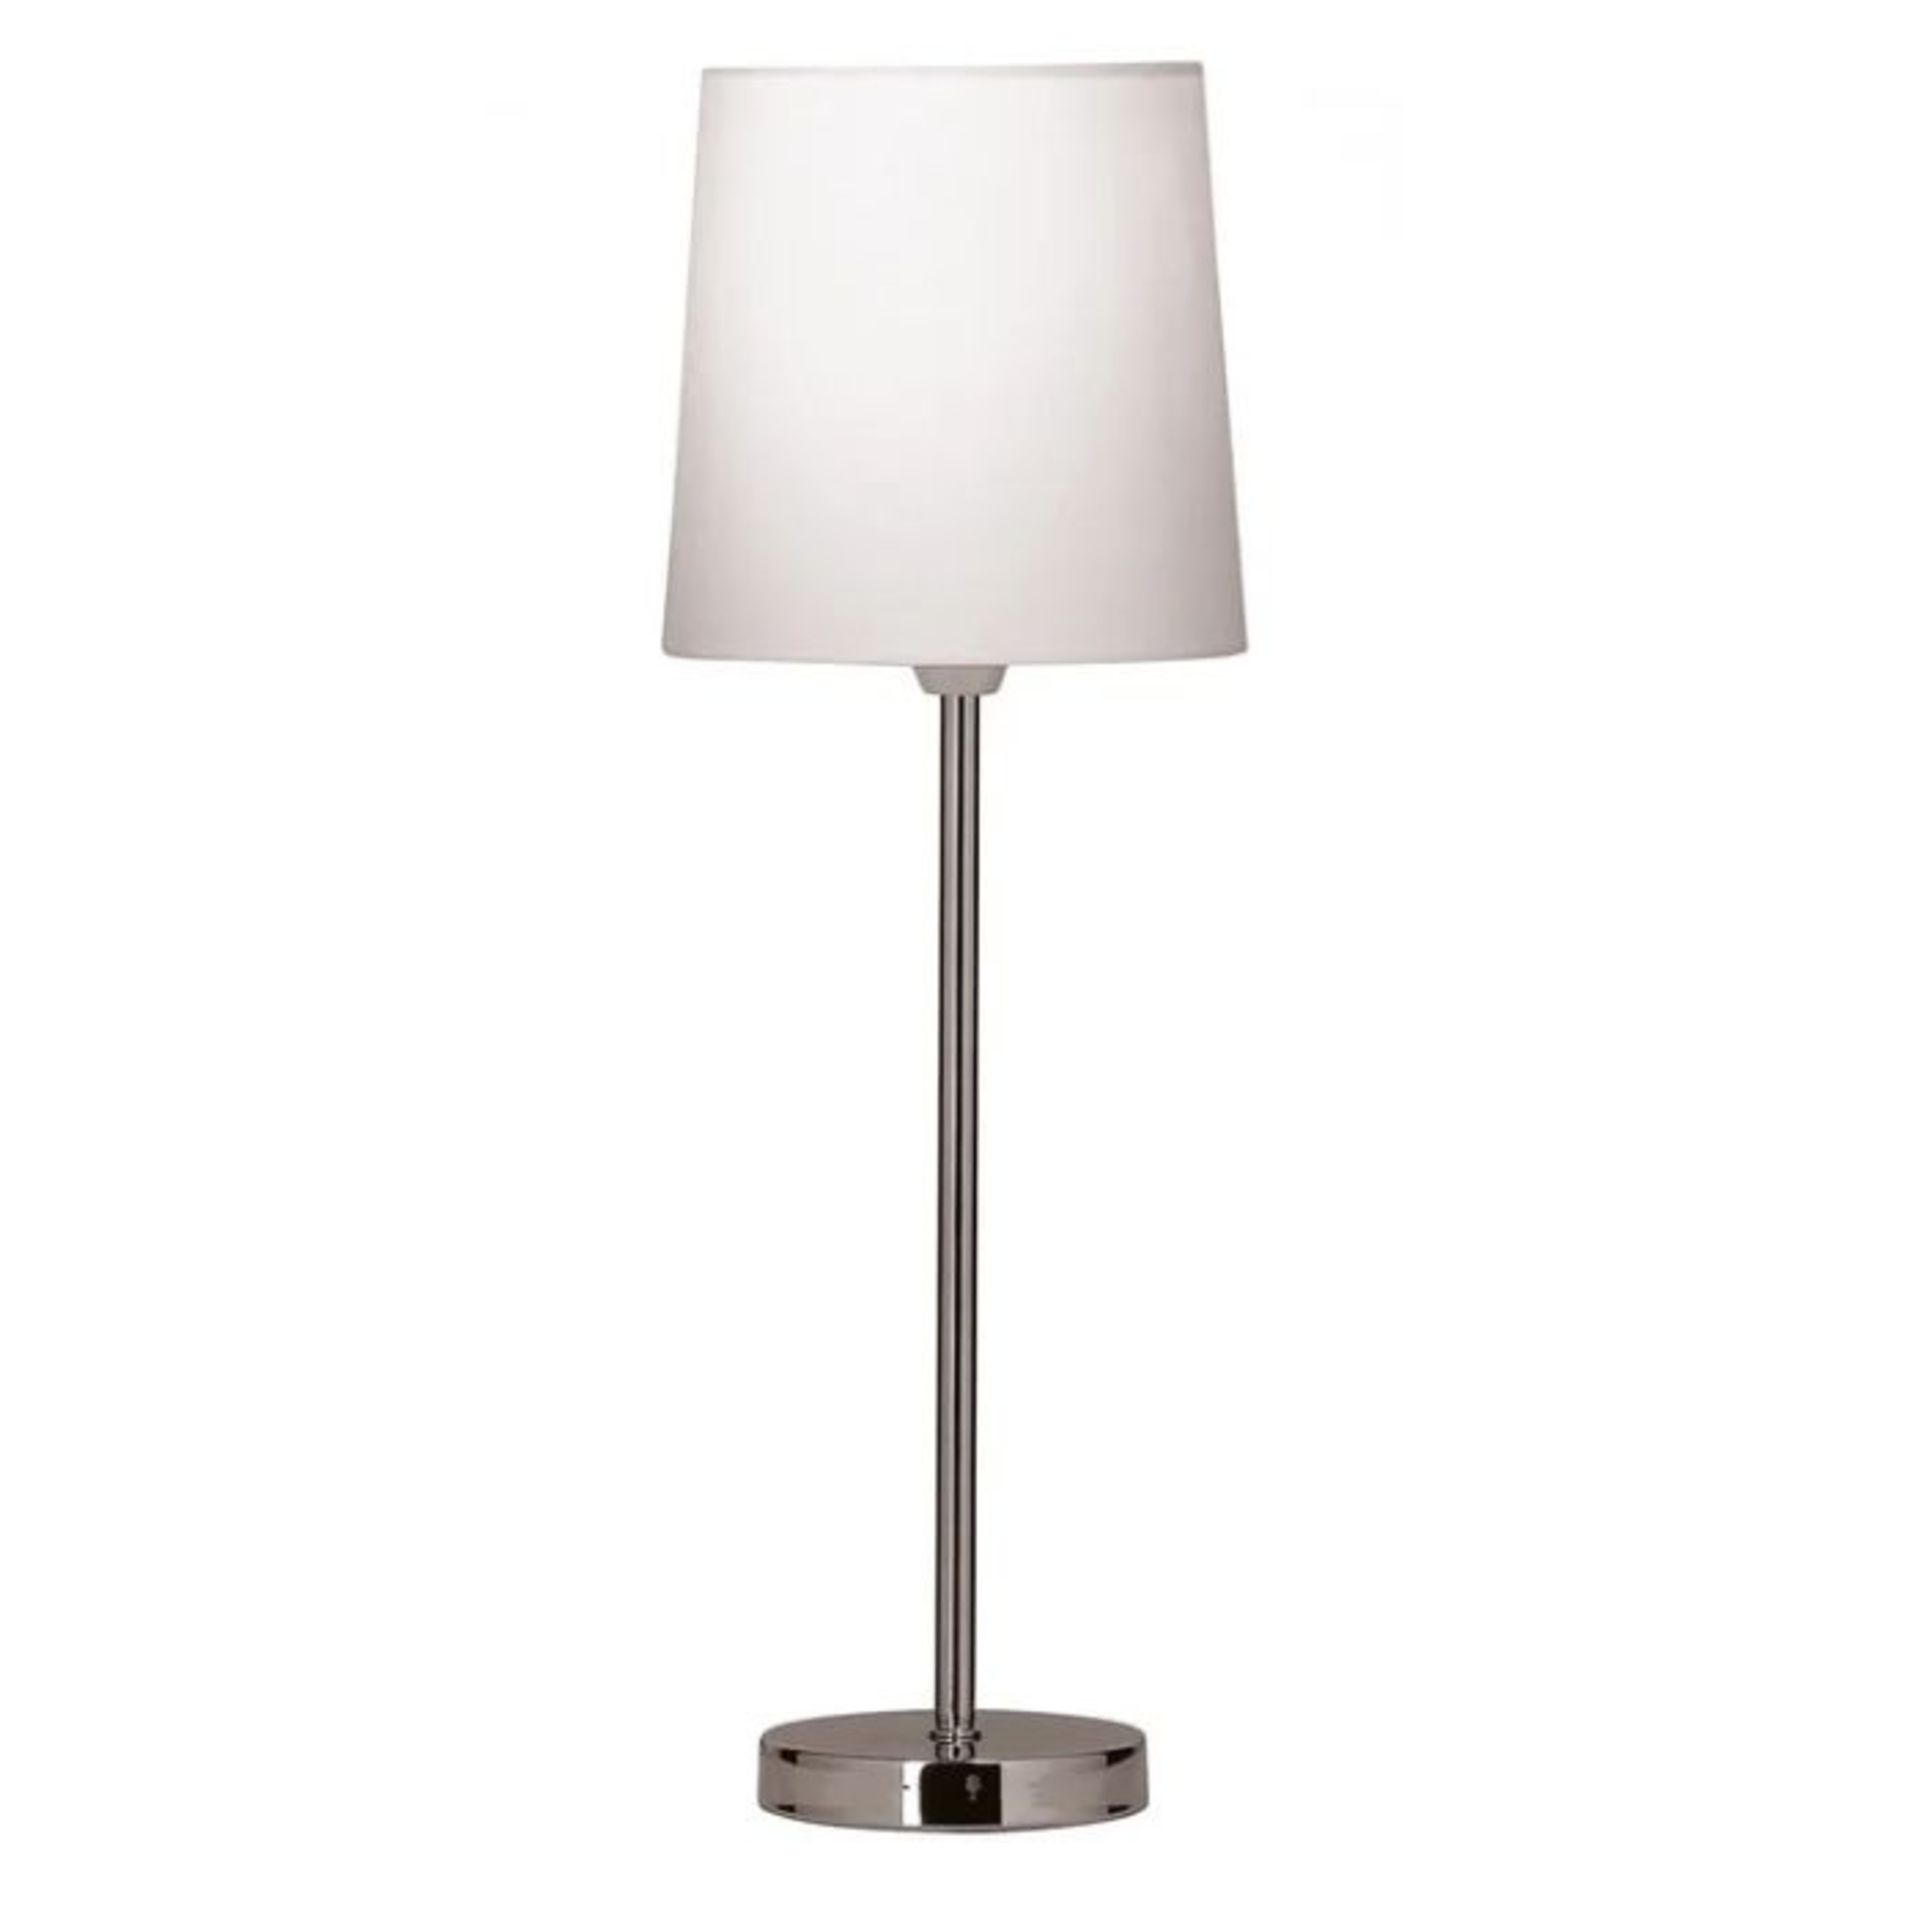 Zipcode Design, Wirila Metallic Table Lamp Shade (WHITE) (16.5cm) (SHADE ONLY NO BASE INCLUDED) -